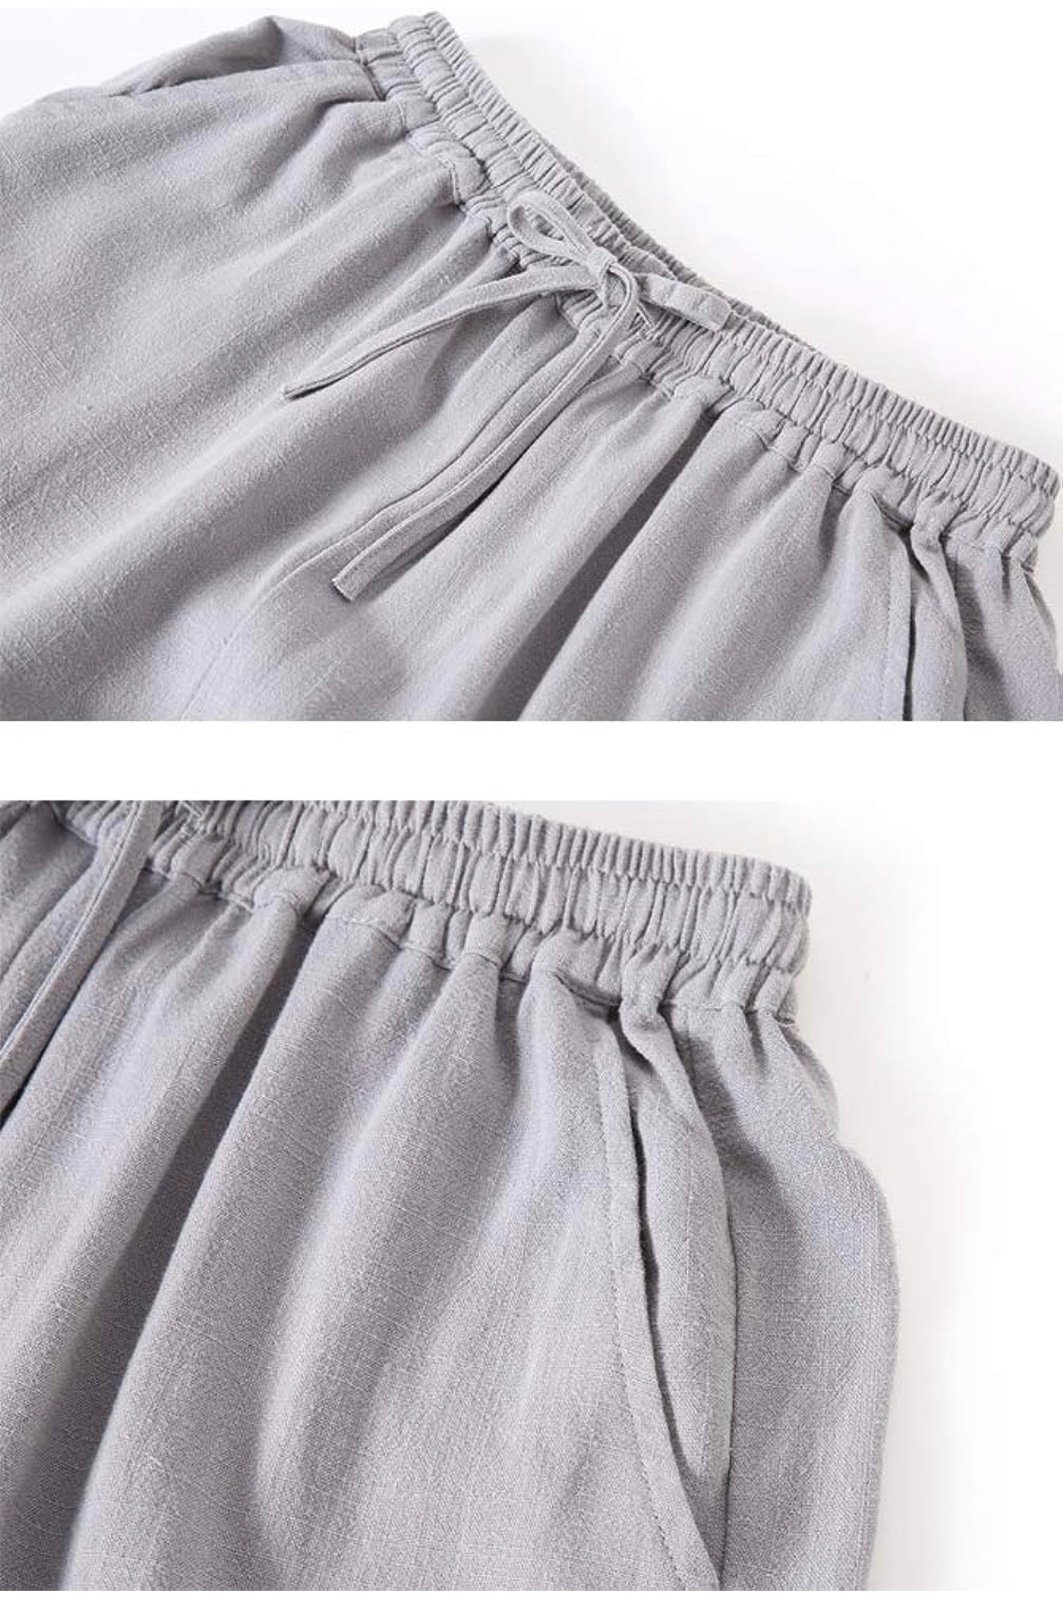 High quality Women´s Linen Pants Drawstring Waist Wide Leg Trousers with Frog Button OvnxR4oSJ High Quaity